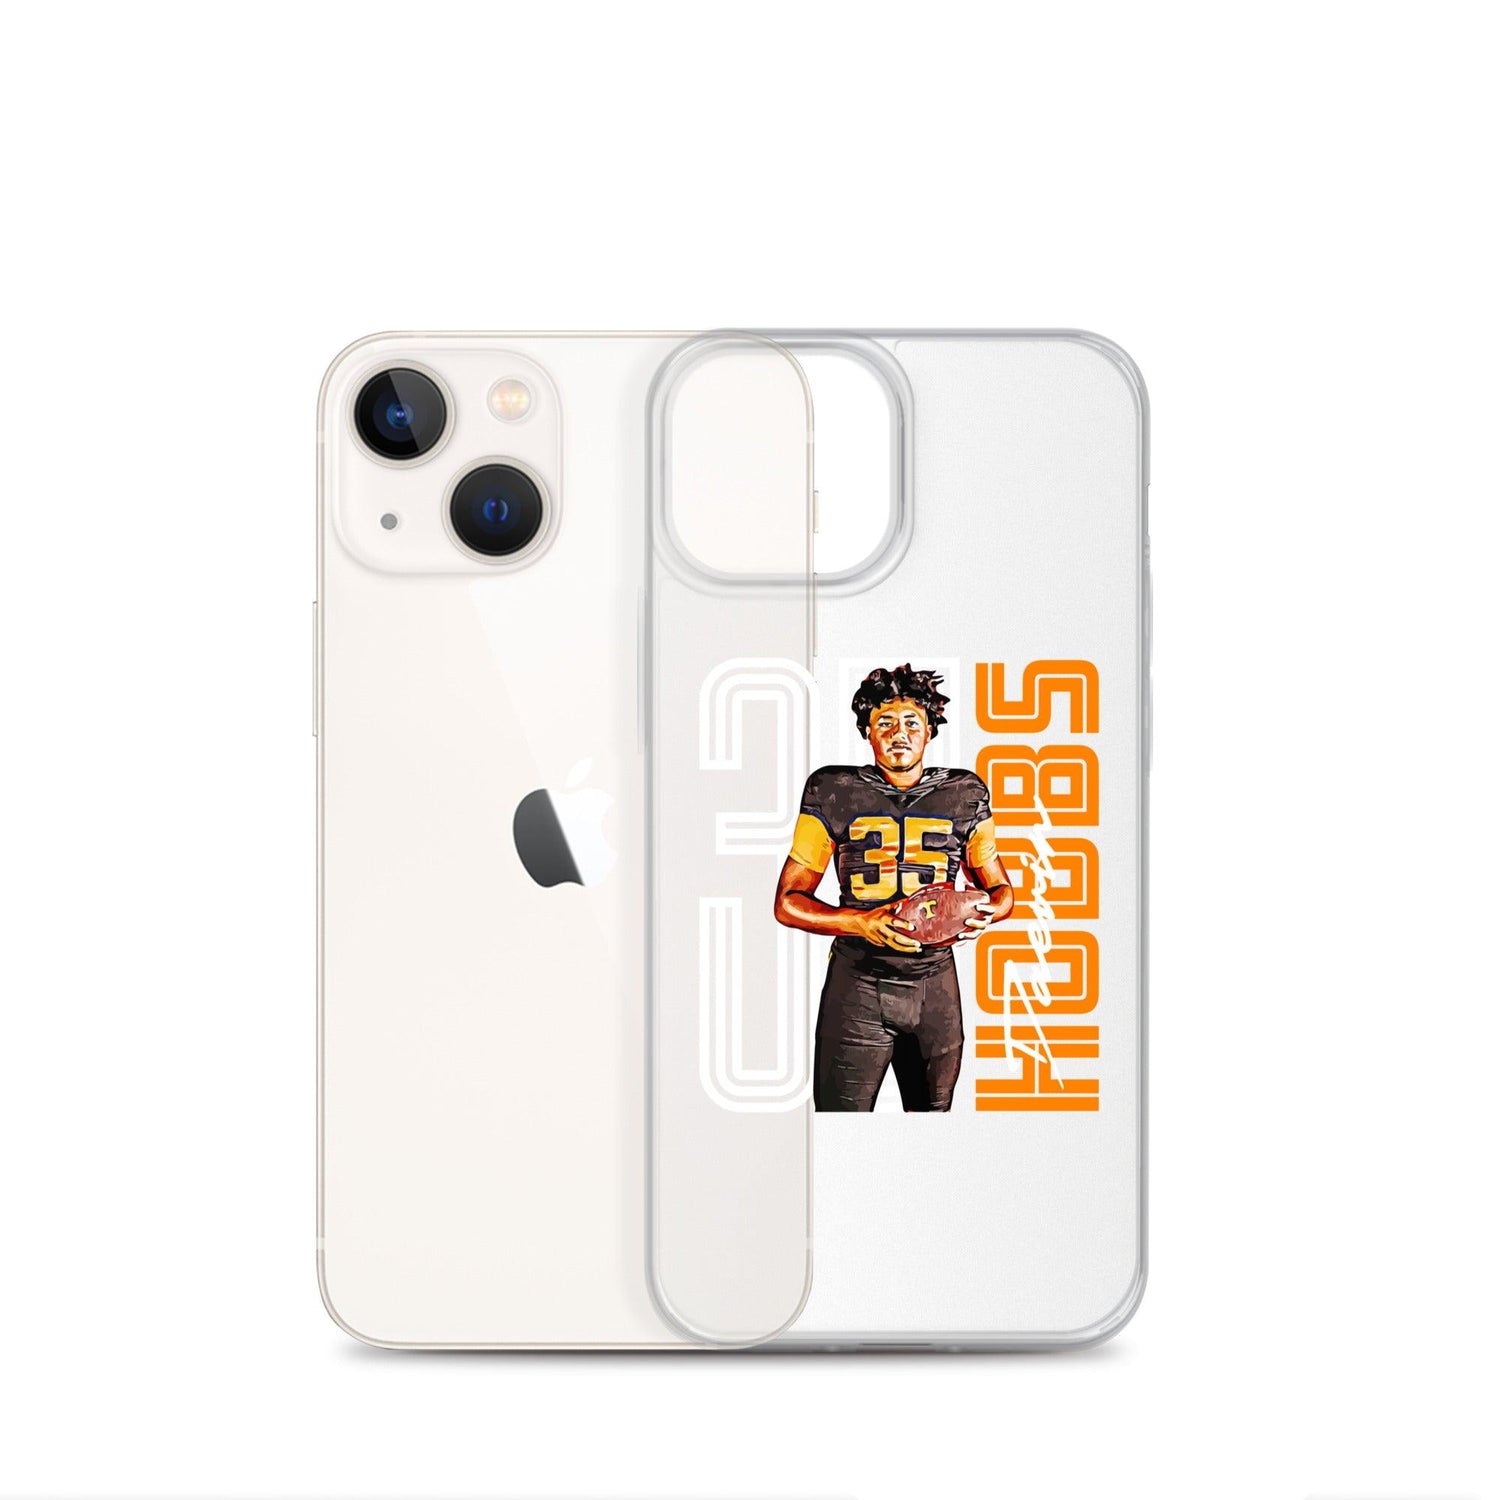 Daevin Hobbs "Gameday" iPhone Case - Fan Arch